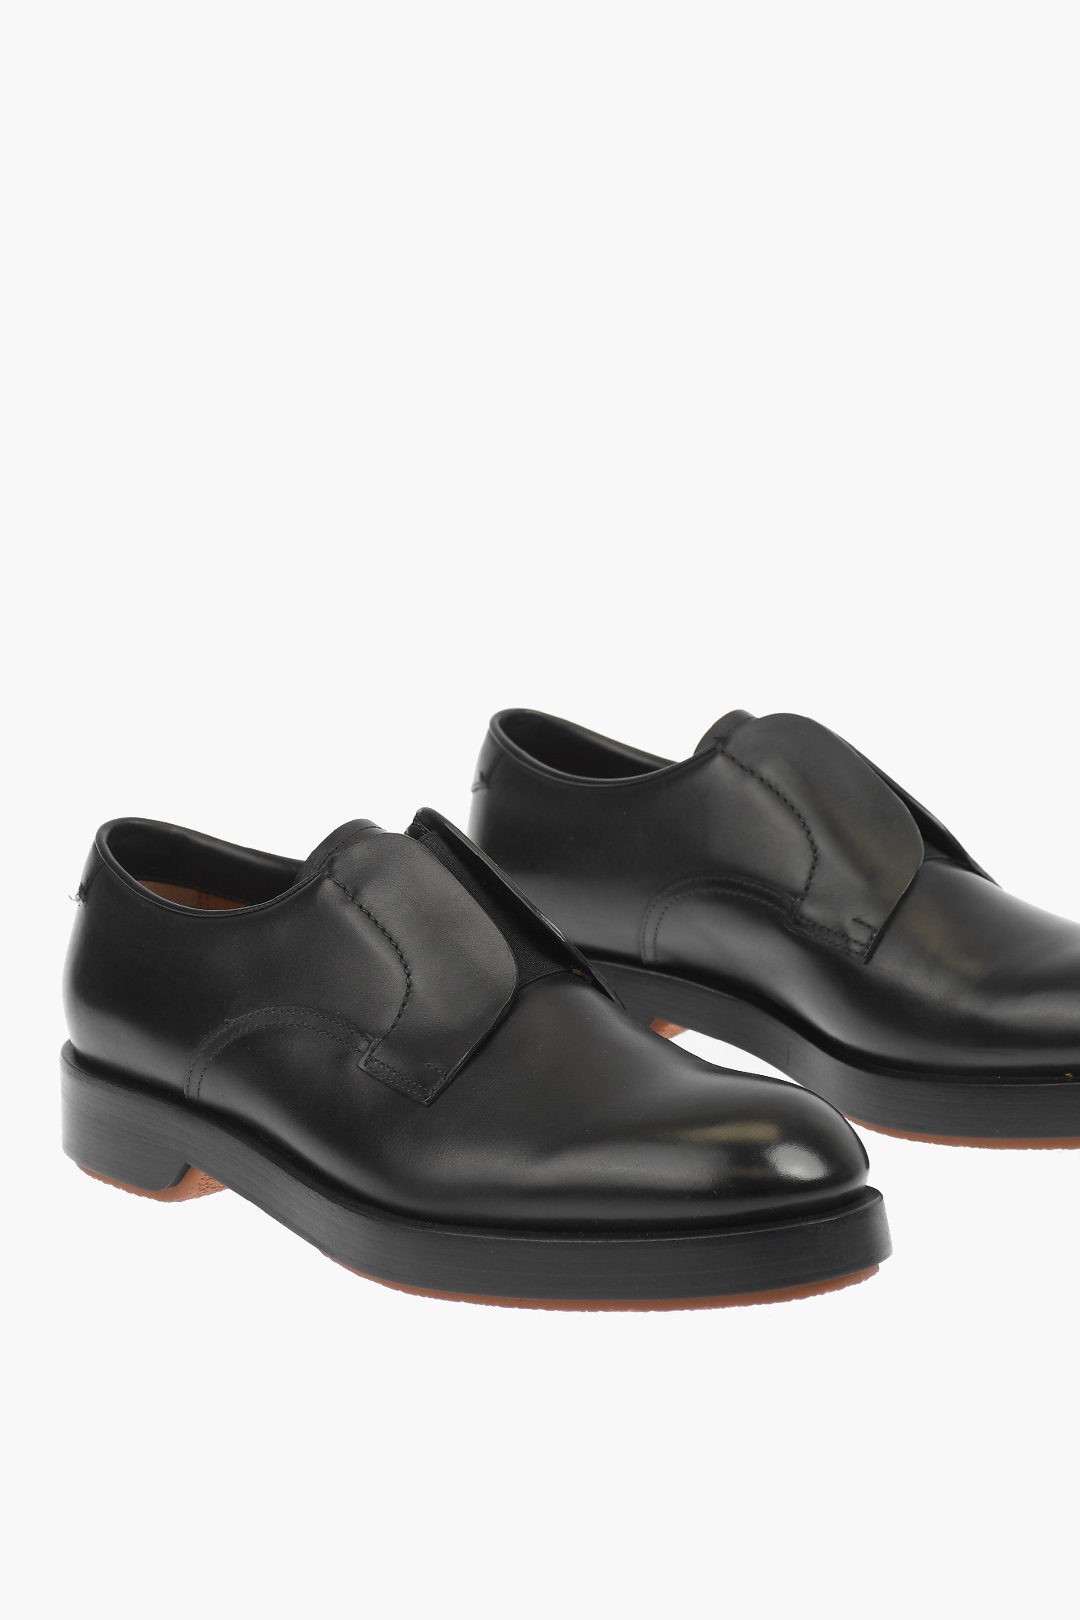 ZEGNA ゼニア ドレスシューズ A5209X LHCLG NER メンズ COUTURE XXX LACELESS LEATHER DERBY SHOES 【関税 送料無料】【ラッピング無料】 dk